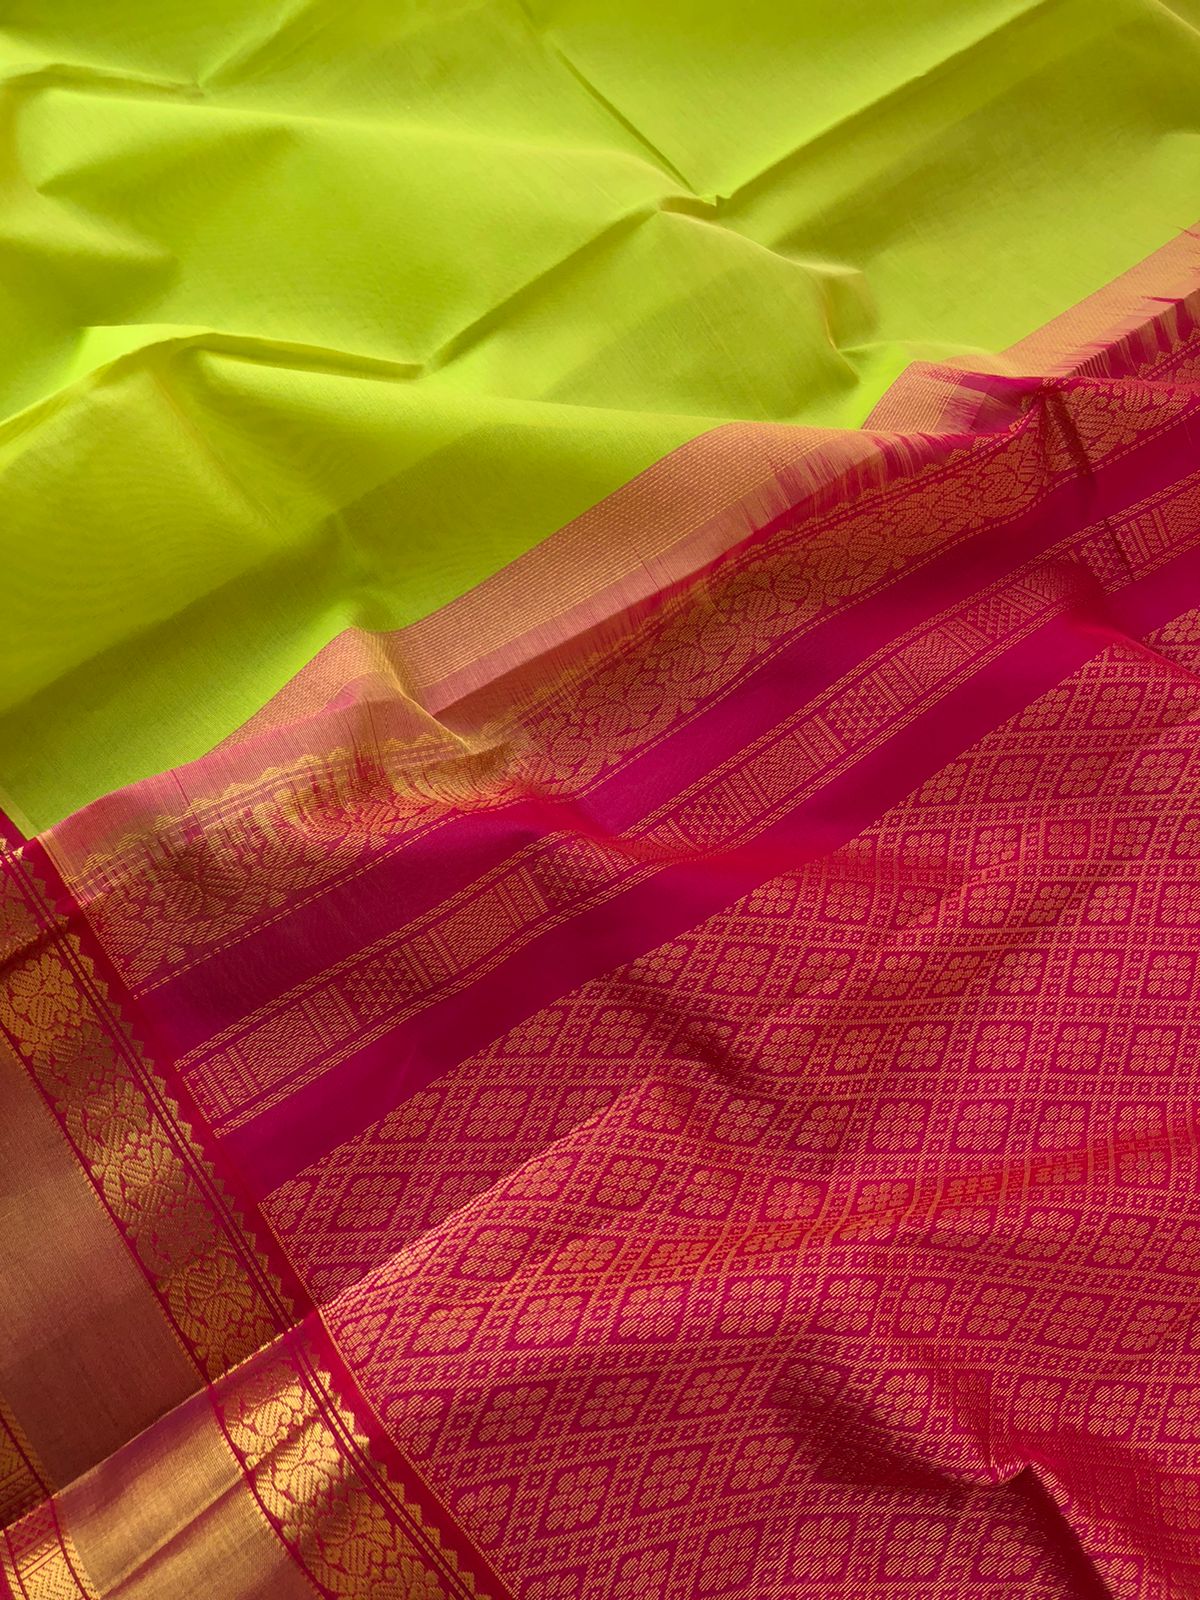 Korvai Silk Cottons Woven Silk Borders - fresh green and pink